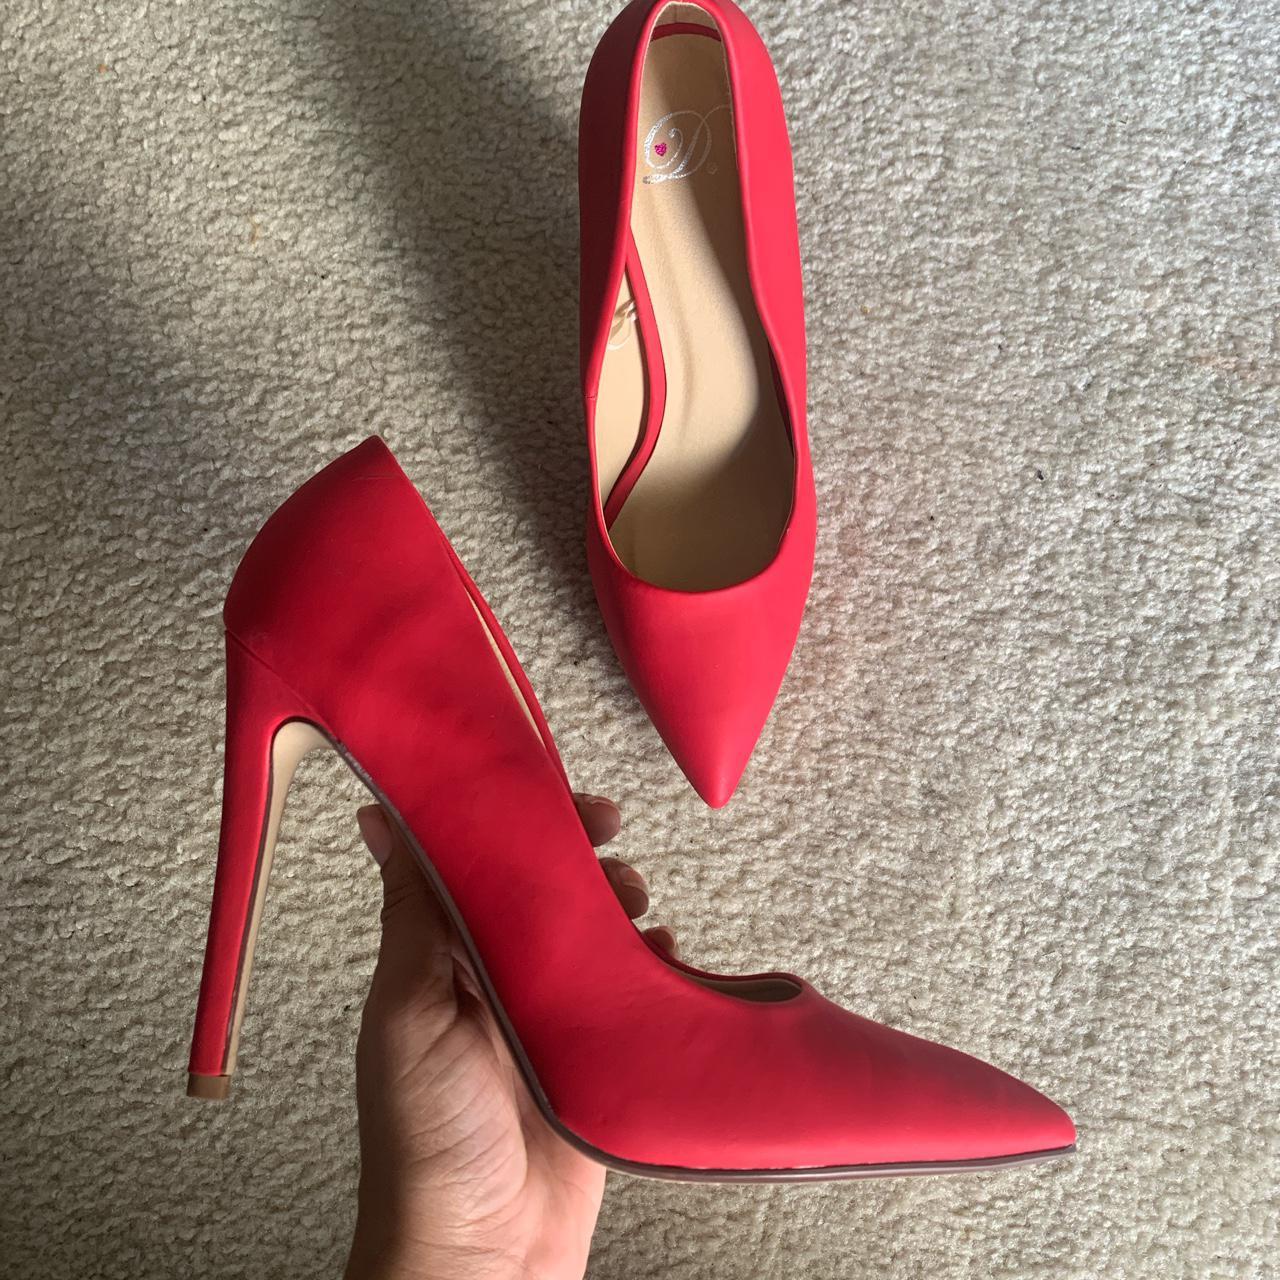 Product Image 3 - RED DOLLHOUSE STILETTO HEELS ❤️
size: